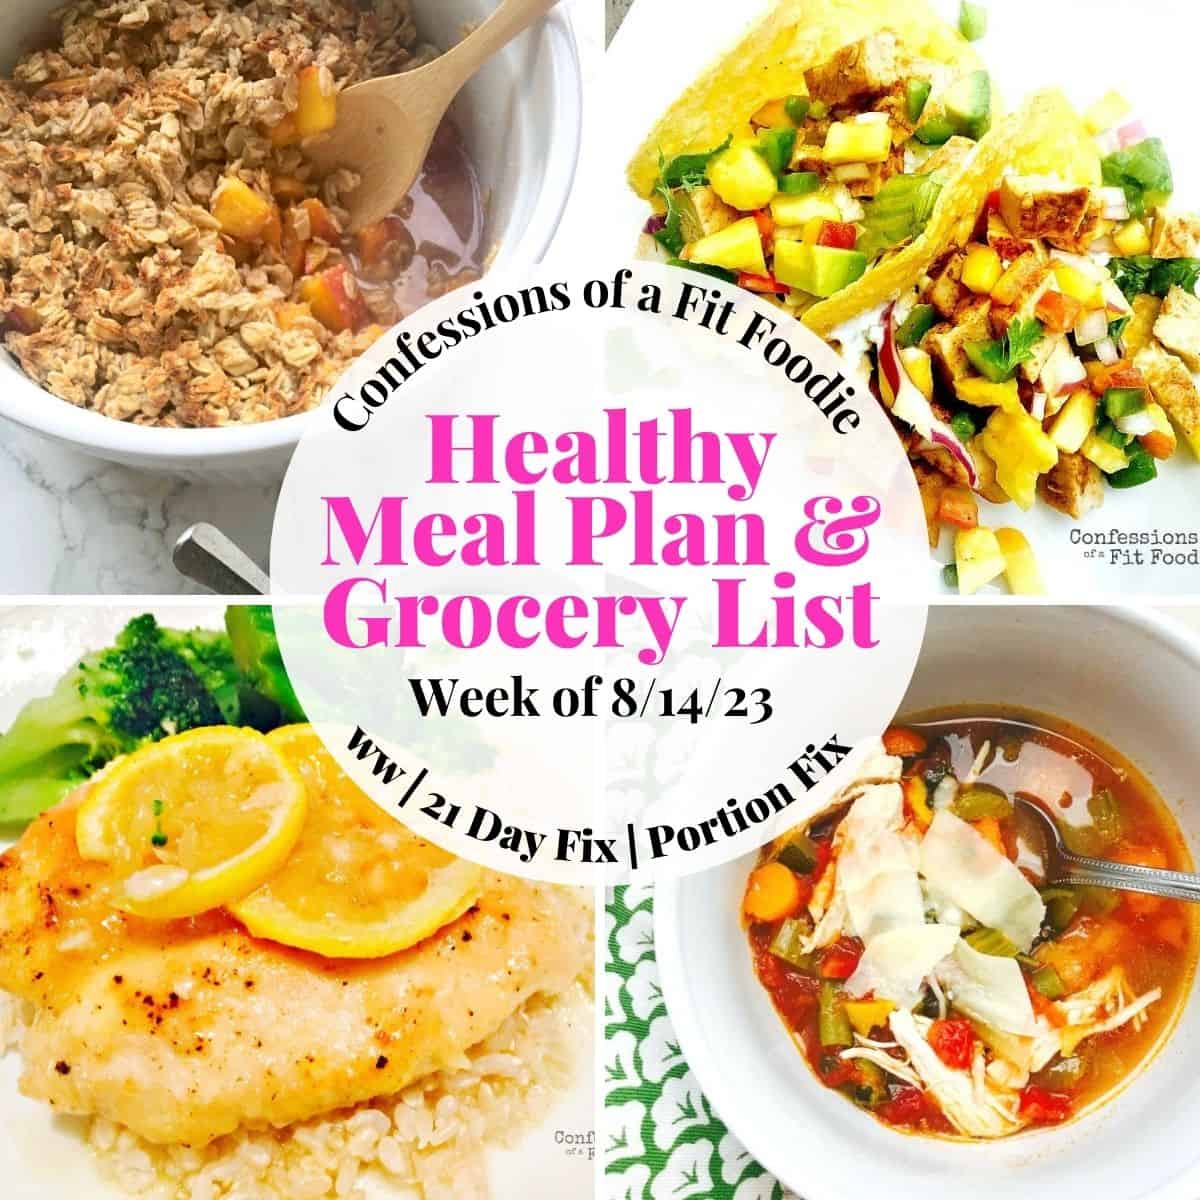 Food photo collage with pink and black text on a white circle. Text says, "Healthy Meal Plan & Grocery List Week of 8/14/23".